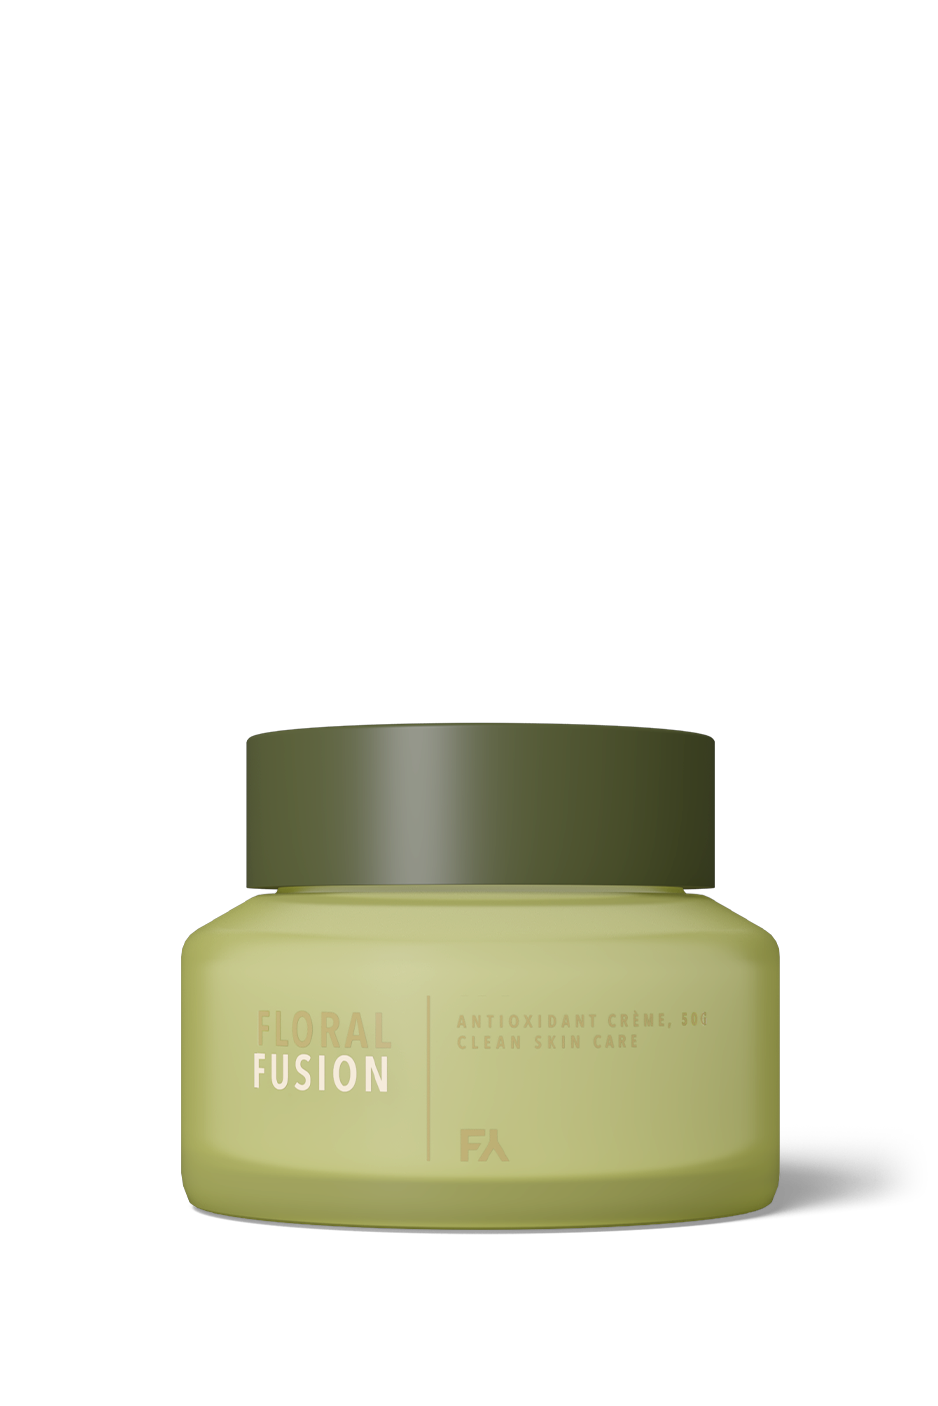 Product picture of the Floral Fusion Antioxidant Cream by Fields of Yarrow on transparent background